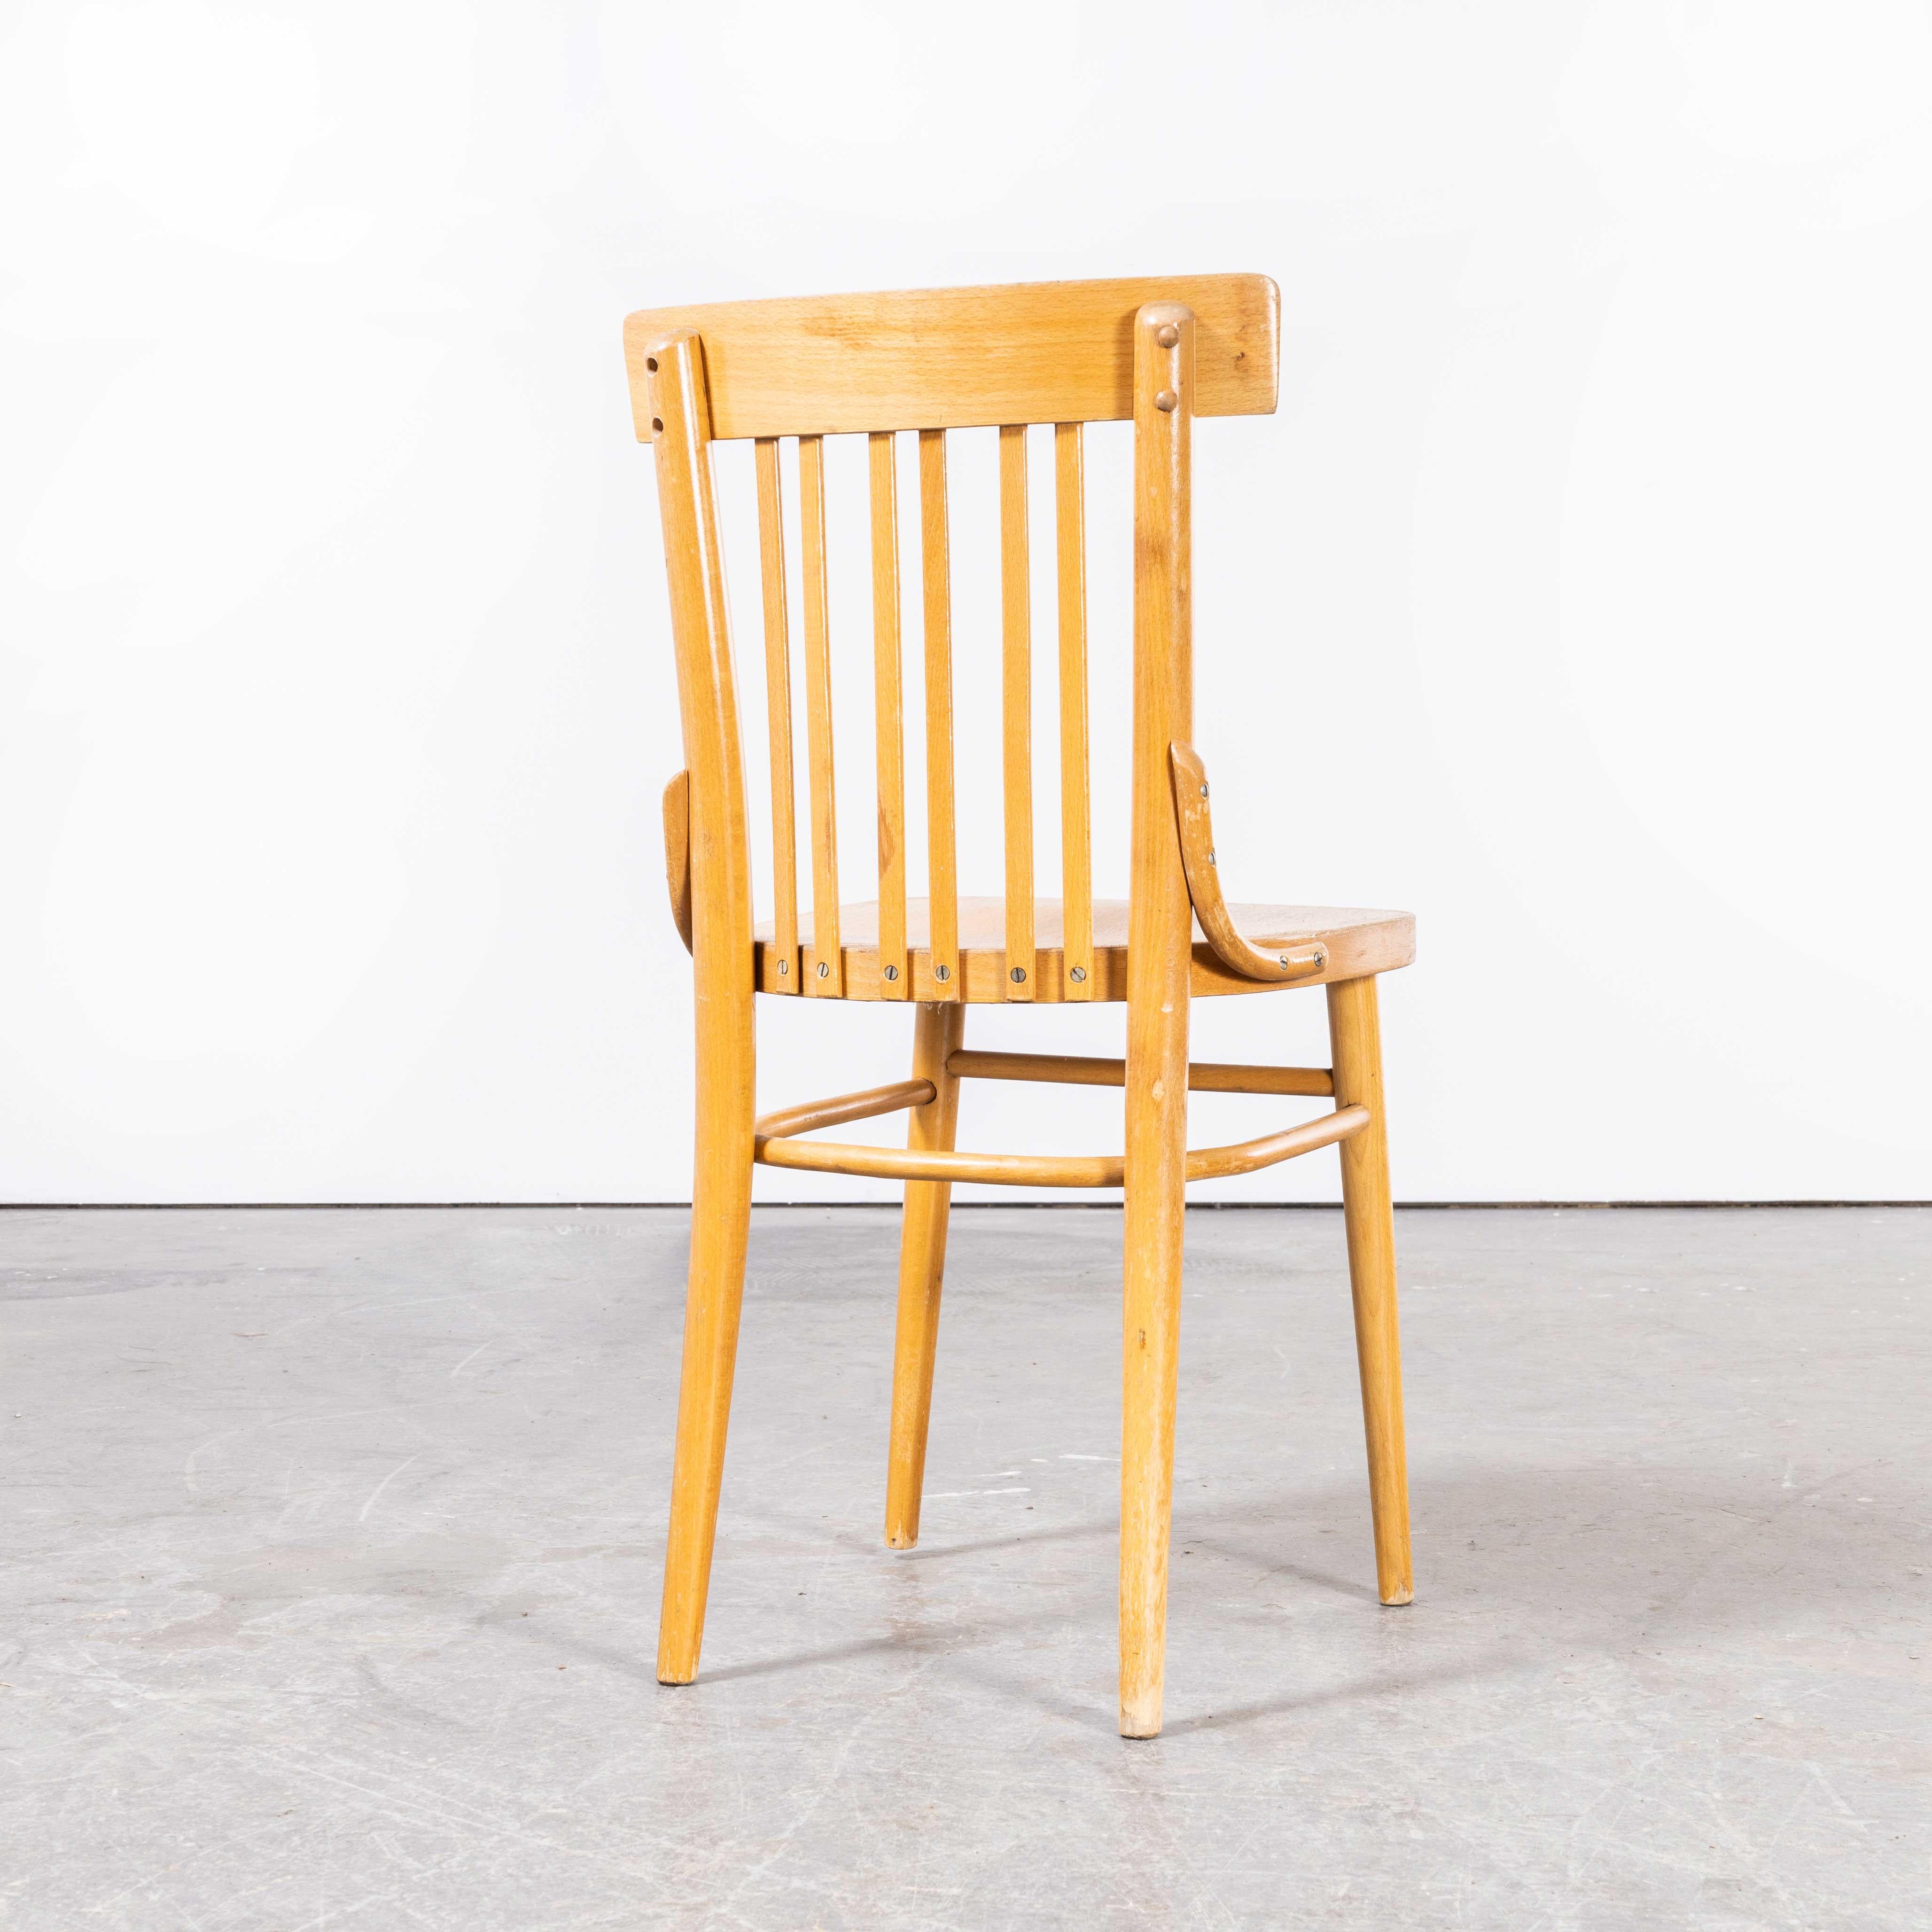 1960?s straight back bentwood dining chair by Ton ? set of eight
1960?s straight back bentwood dining chair by Ton ? set of eight. These chairs were produced by the famous Czech firm Ton, still trading today and producing beautiful chairs, they are